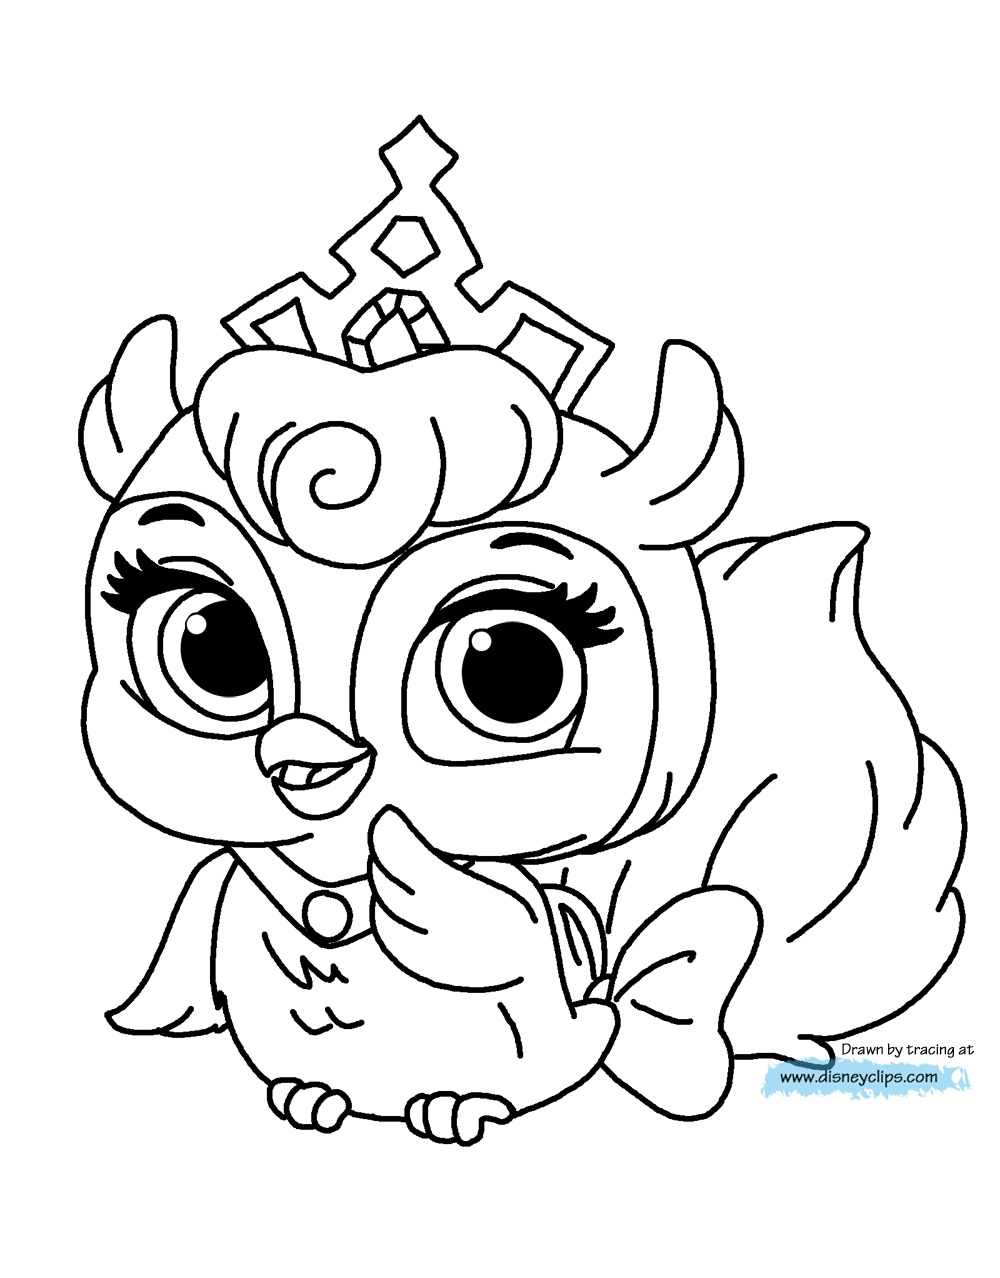 Princess Puppy Coloring Pages at GetColorings.com | Free printable ...